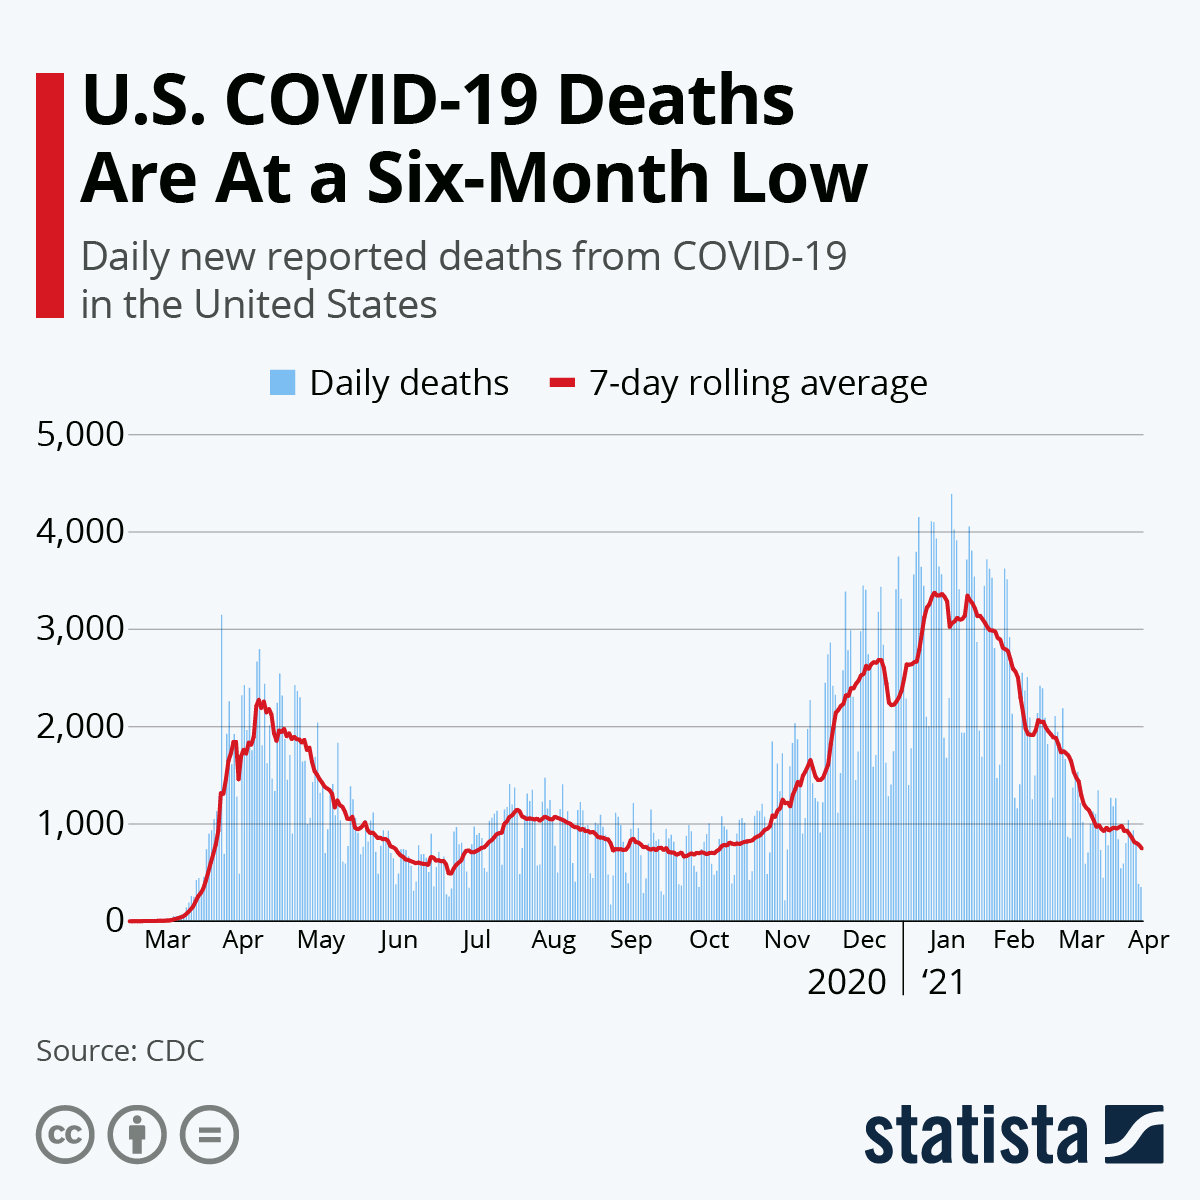 U.S. COVID-19 Deaths Are At a Six-Month Low